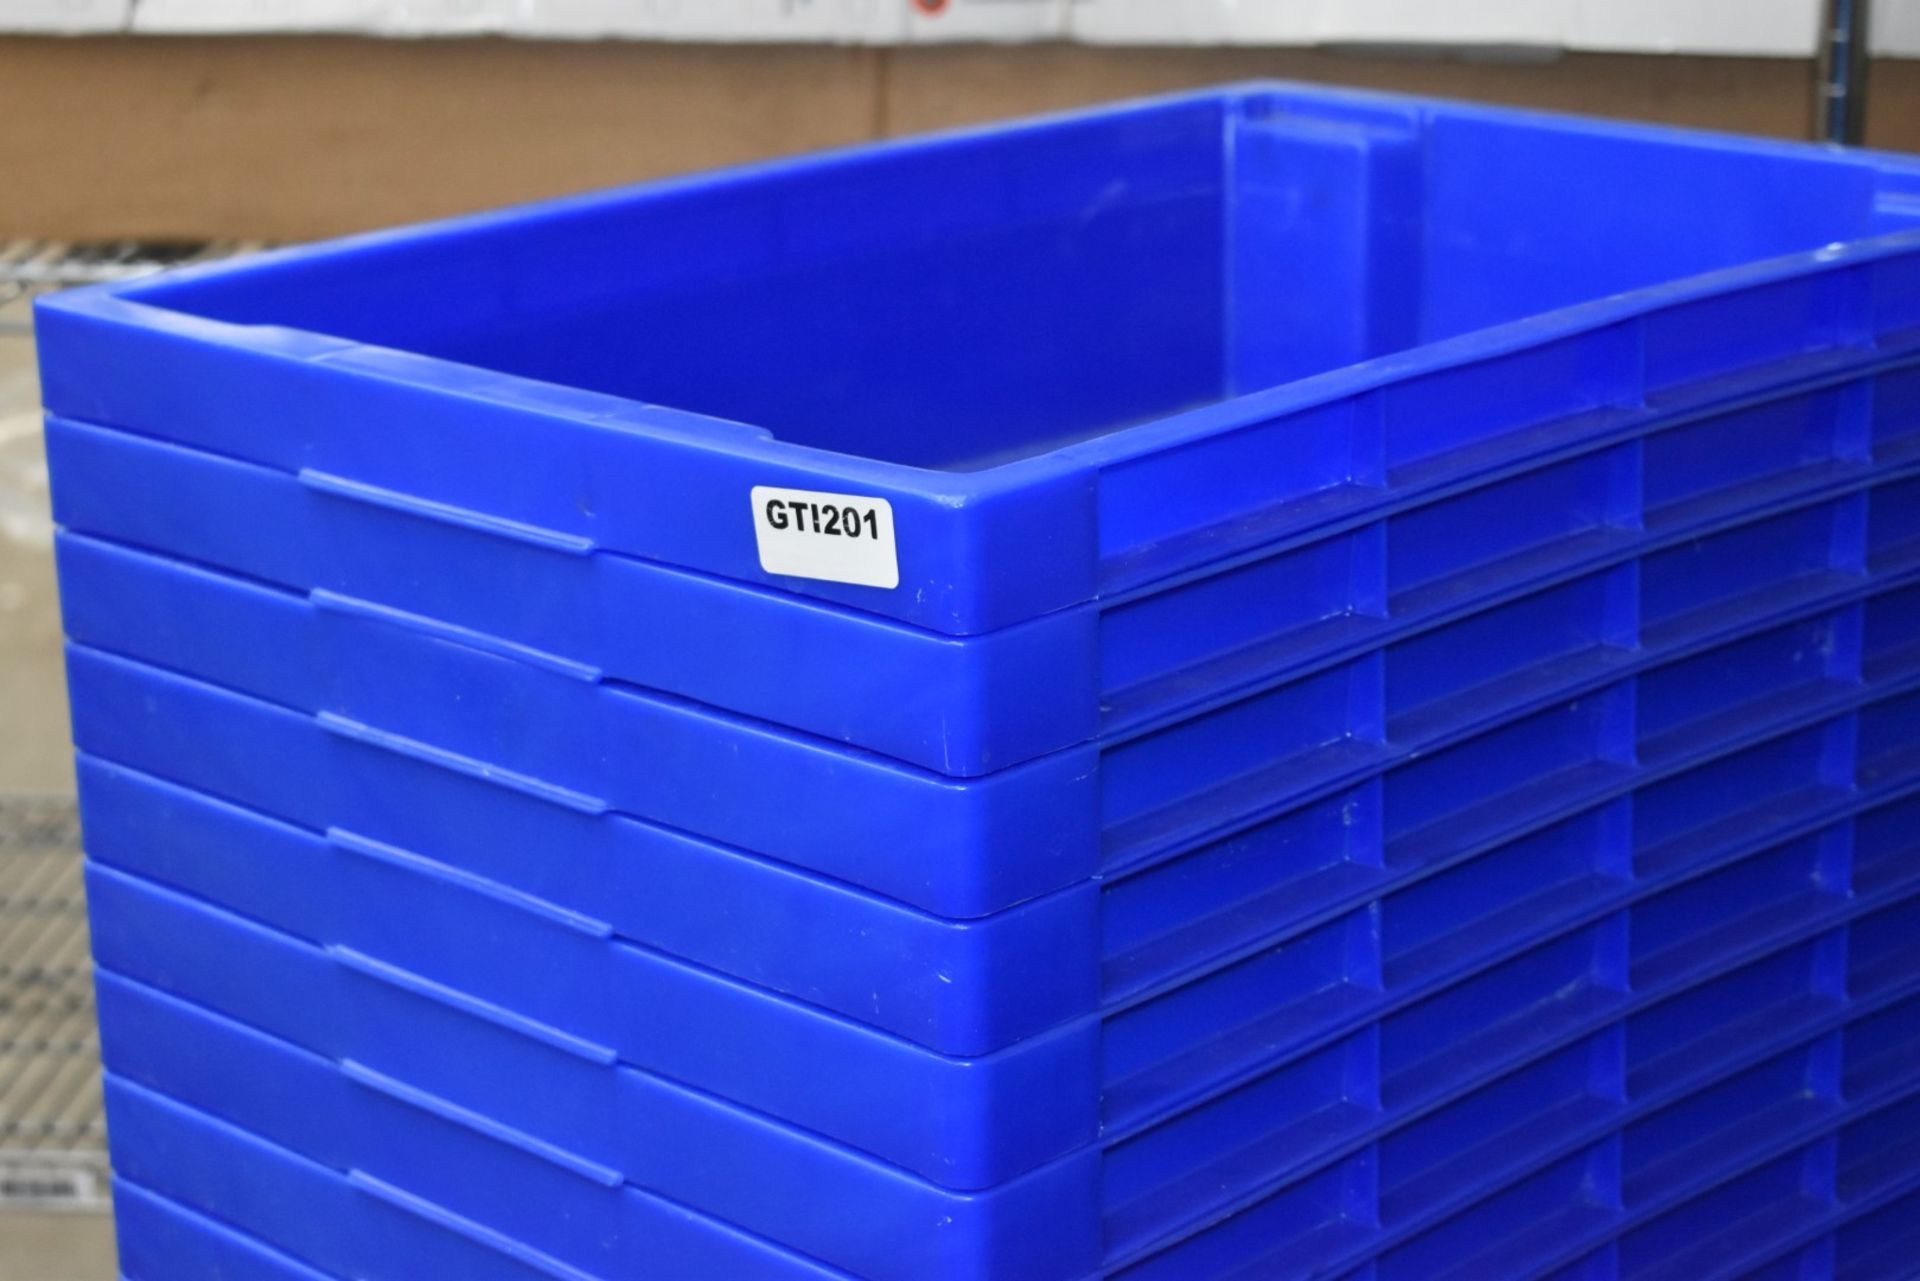 27 x Plastic Stackable Storage Trays in Blue - Includes Mobile Platform Dolly on Castors - Tray - Image 7 of 7